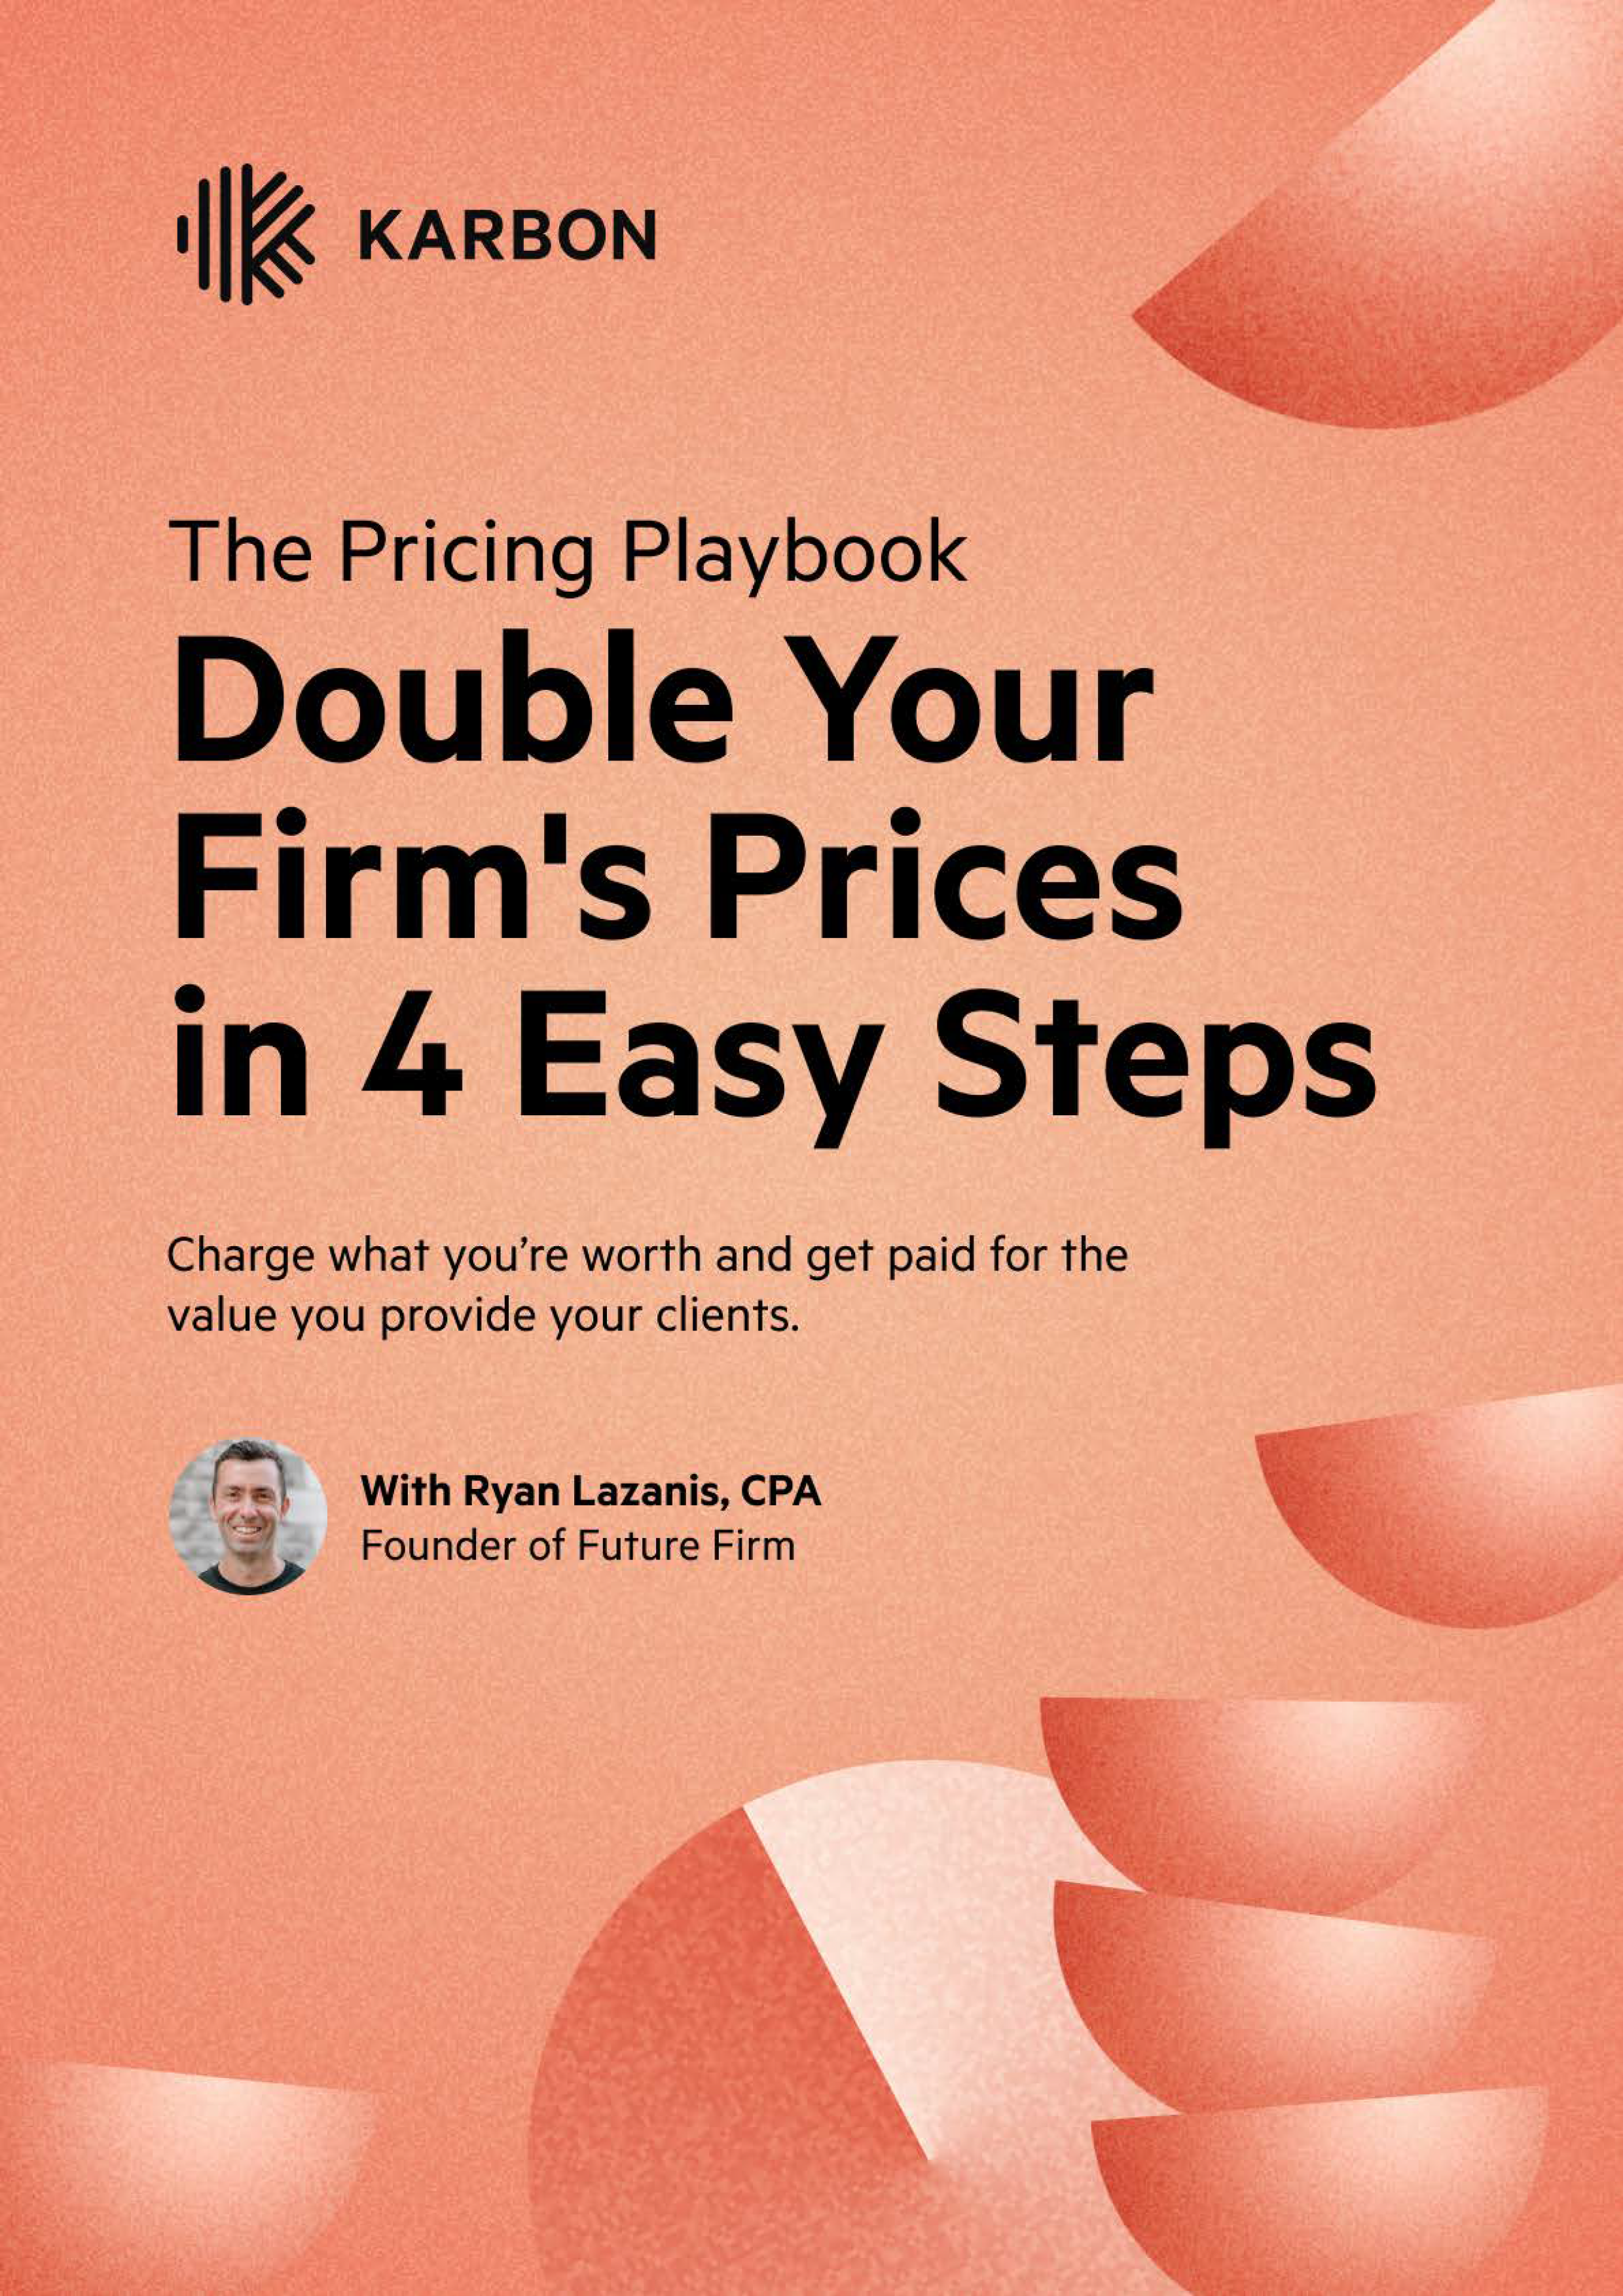 The Pricing Playbook: Double Your Firm's Prices in 4 Easy Steps by Karbon image